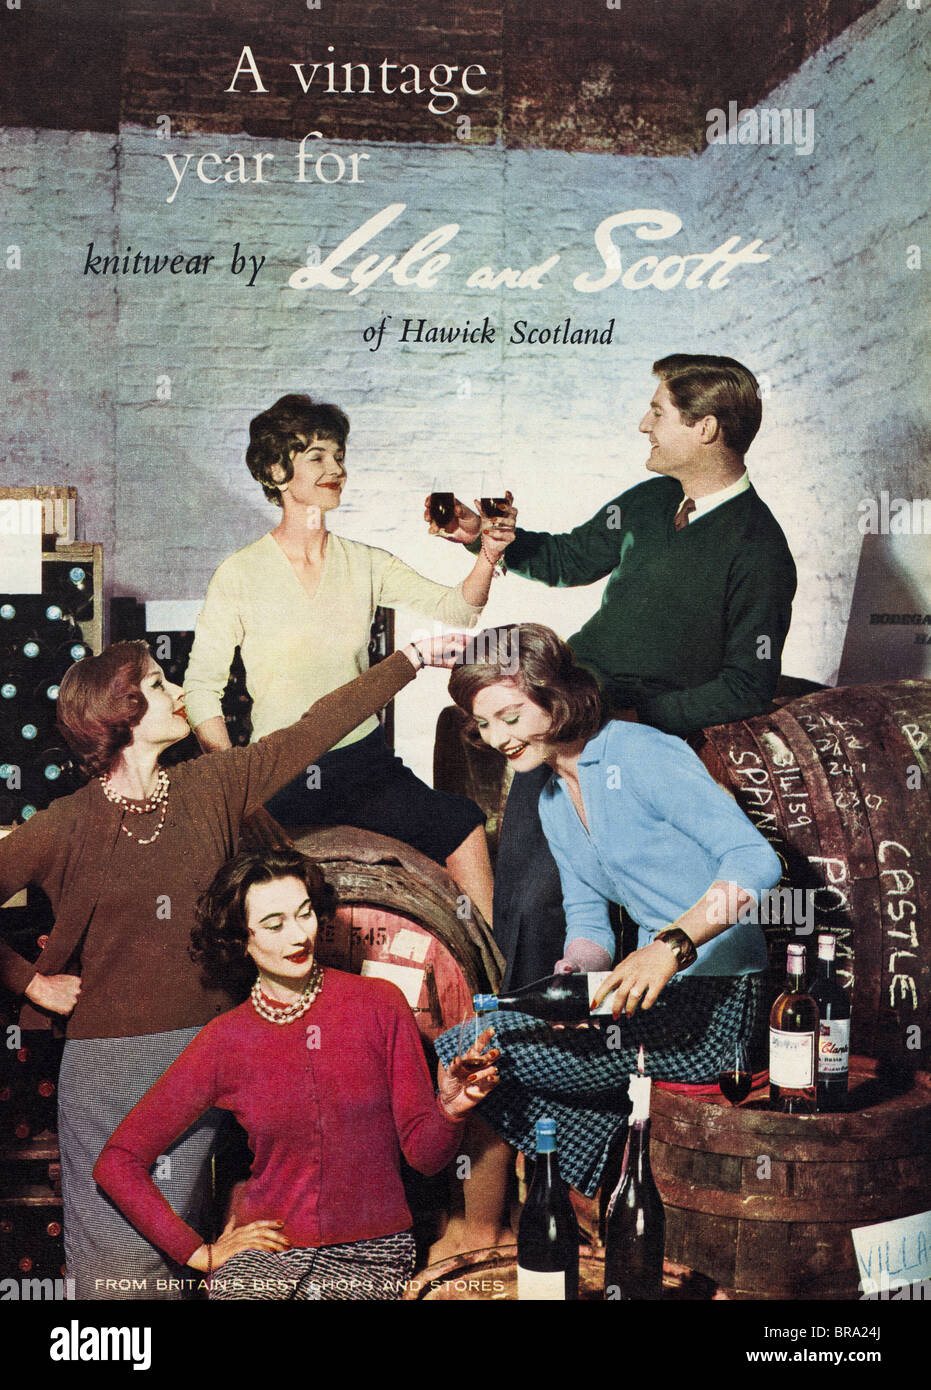 50s fashion advert for Lyle and Scott knitwear circa 1959 Stock Photo